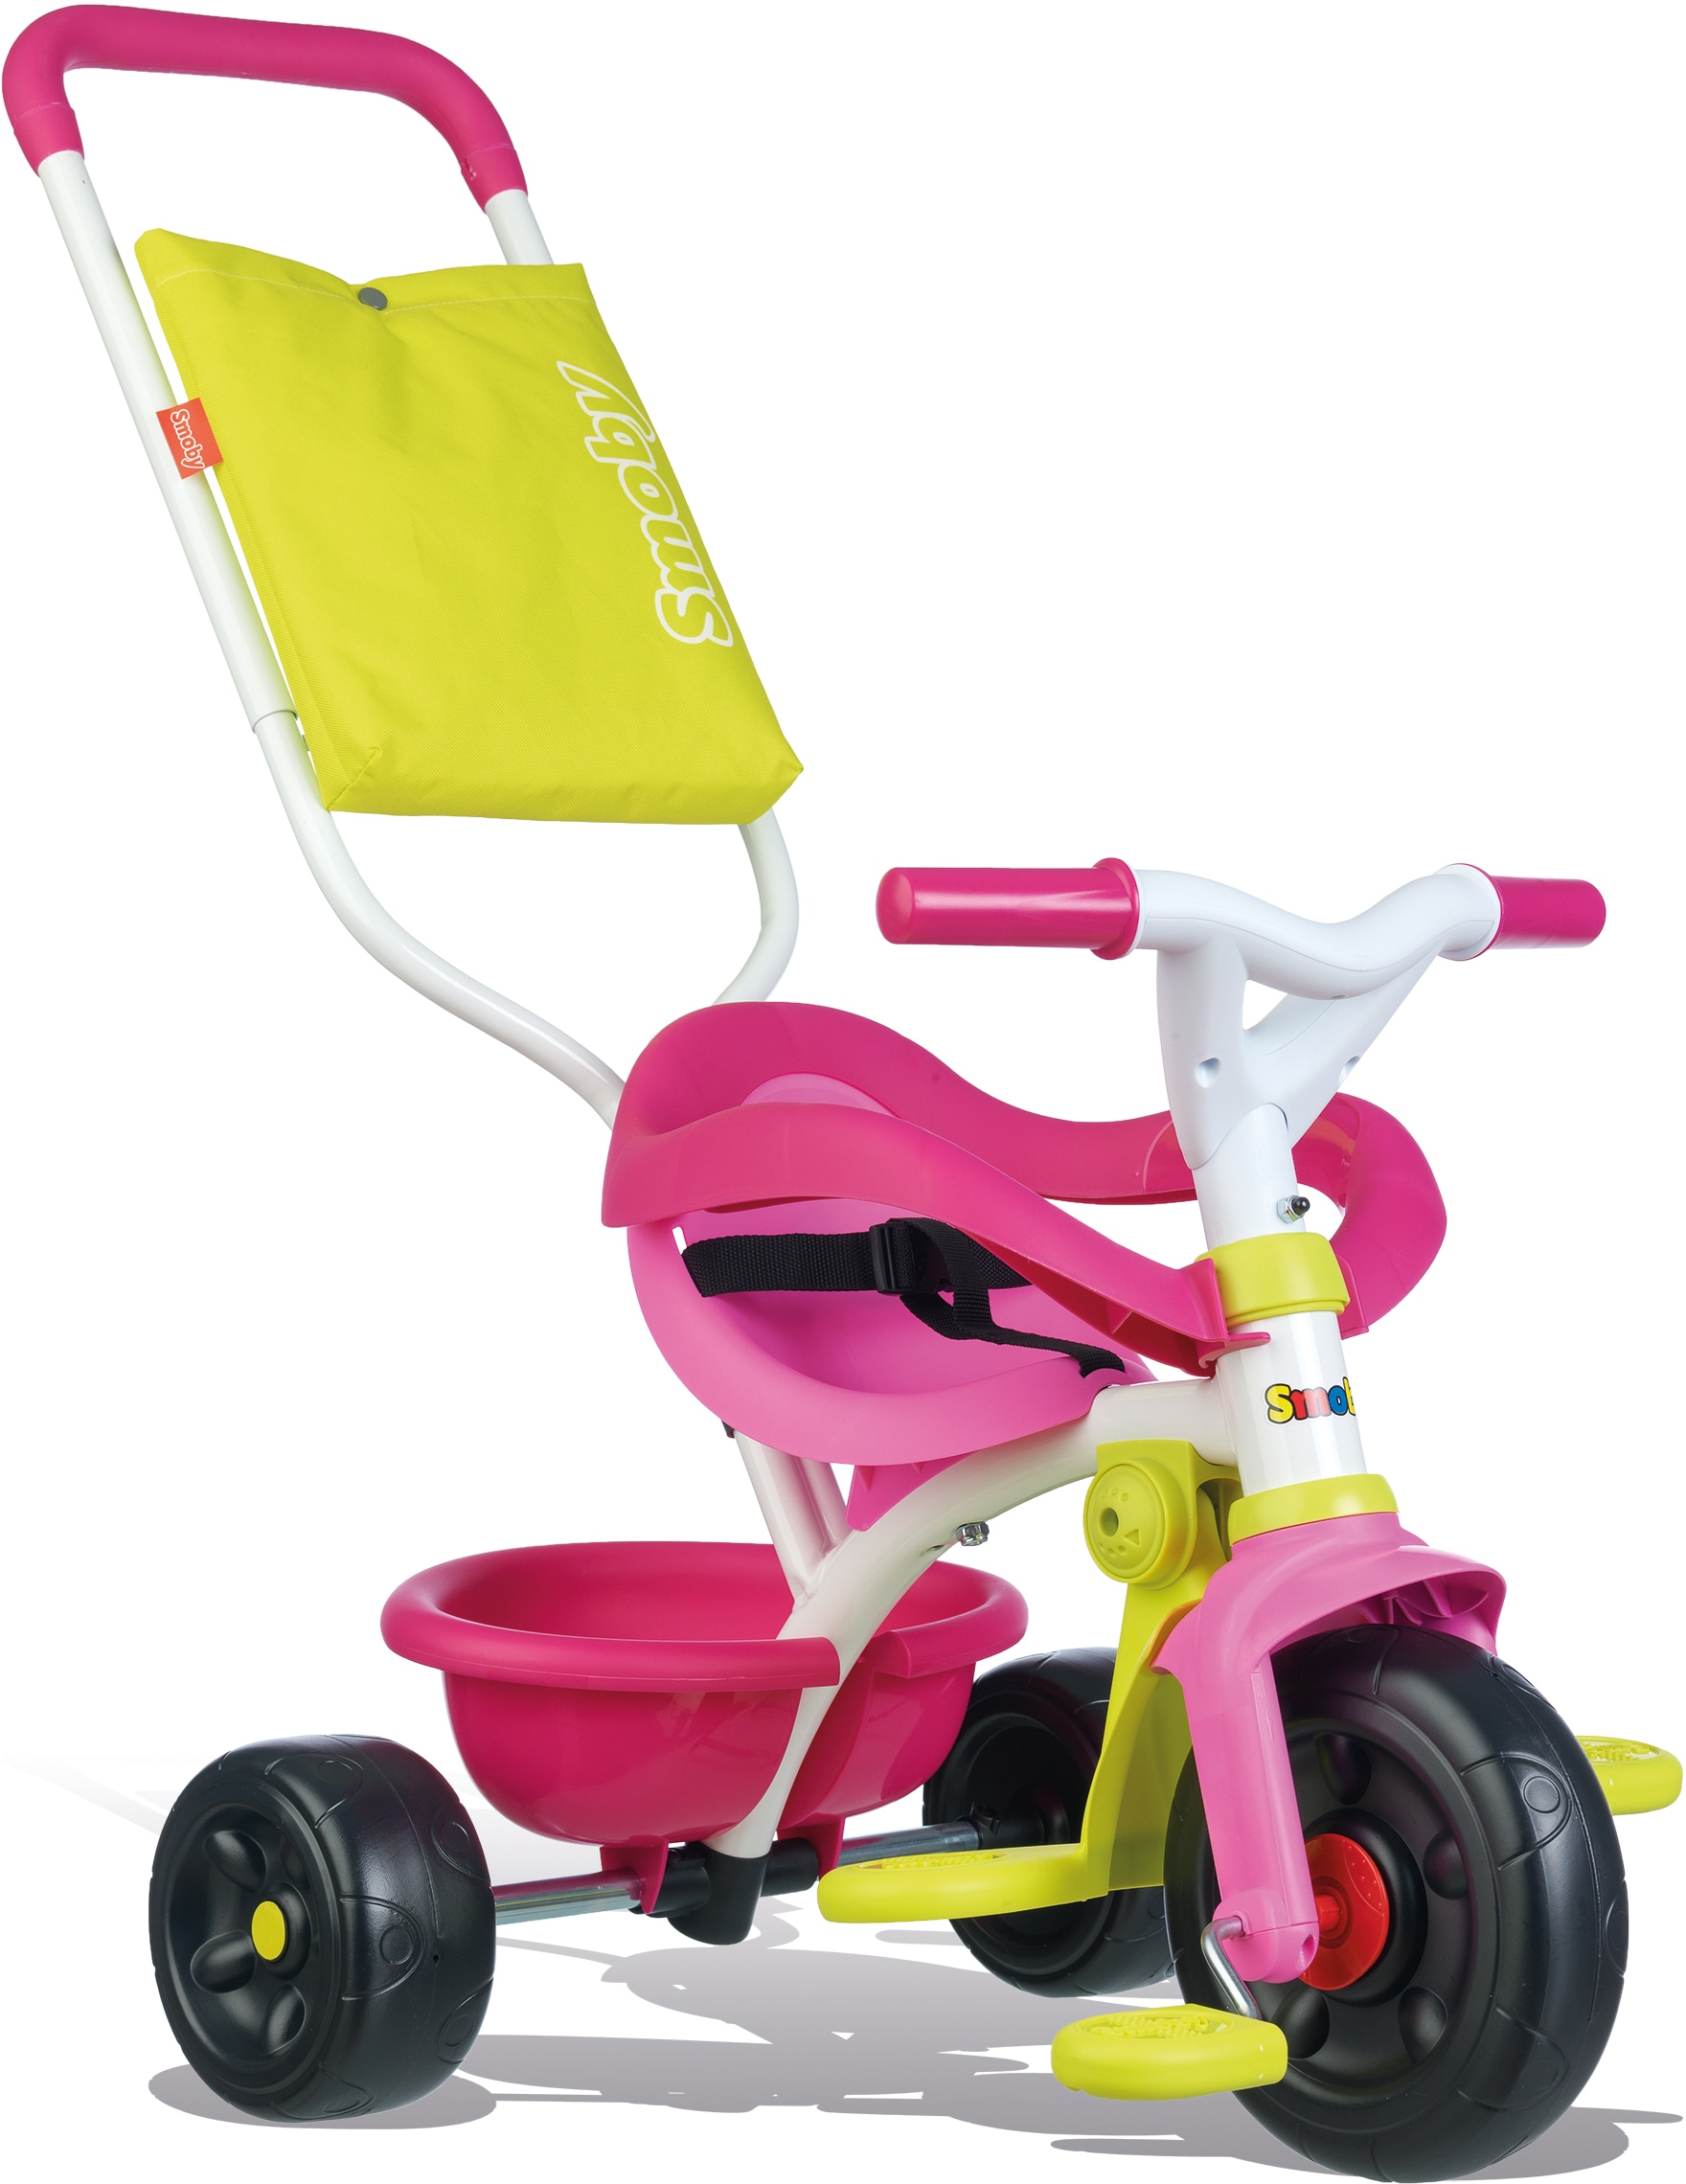 Smoby Dreirad bequem »Be rosa«, Europe kaufen Fun Komfort, Made in